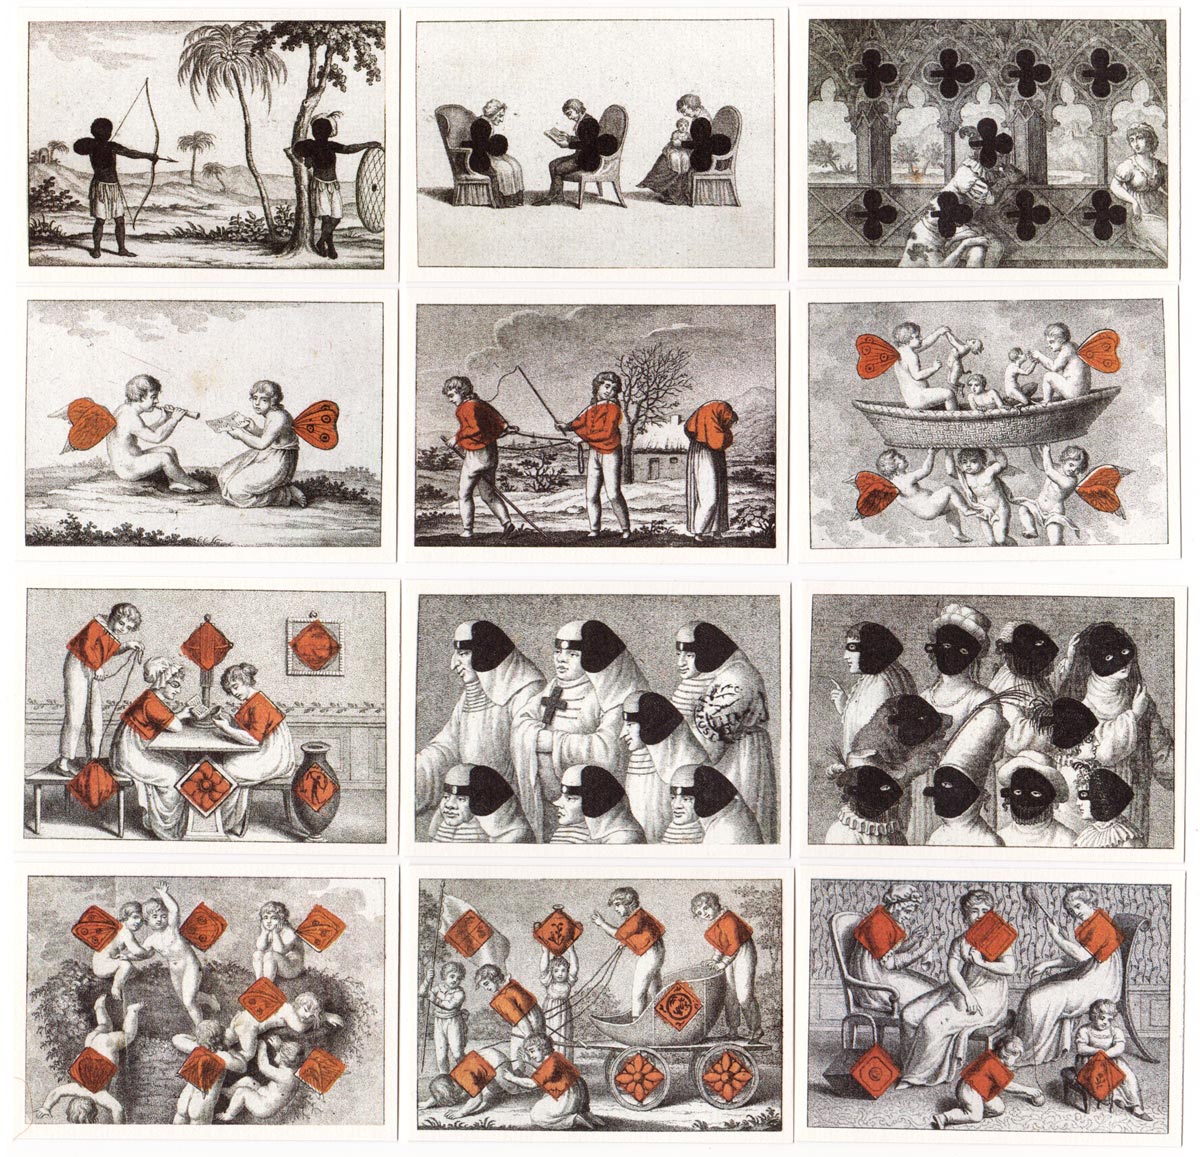 Cotta's Transformation playing cards, first published in Tübingen, Germany, in 1804